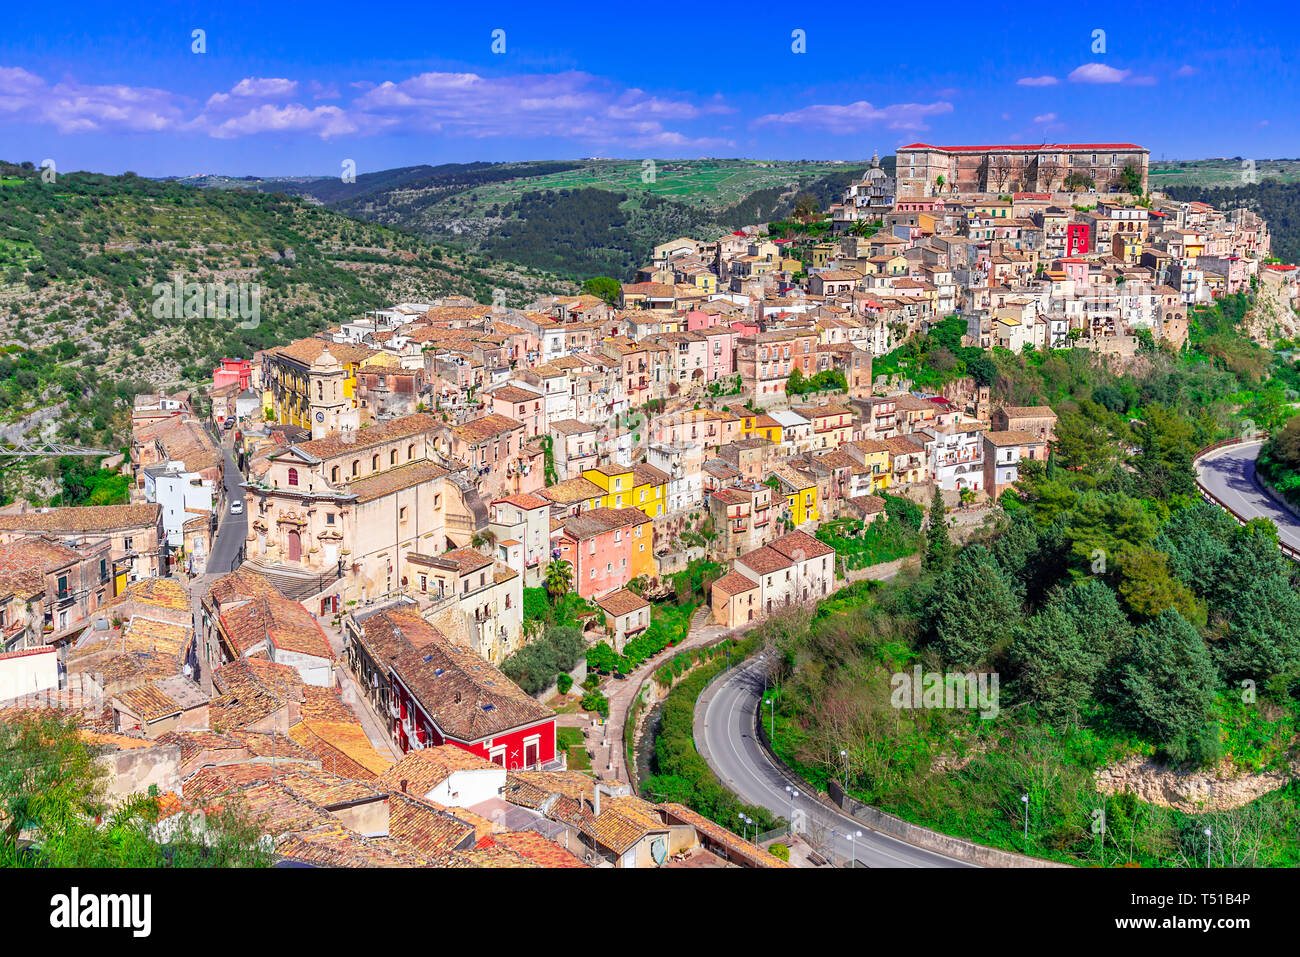 Ragusa, Sicily island, Italy: Panoramic view of Ragusa Ibla, baroque town in Sicily, southern Italy on the island of Sicily Stock Photo